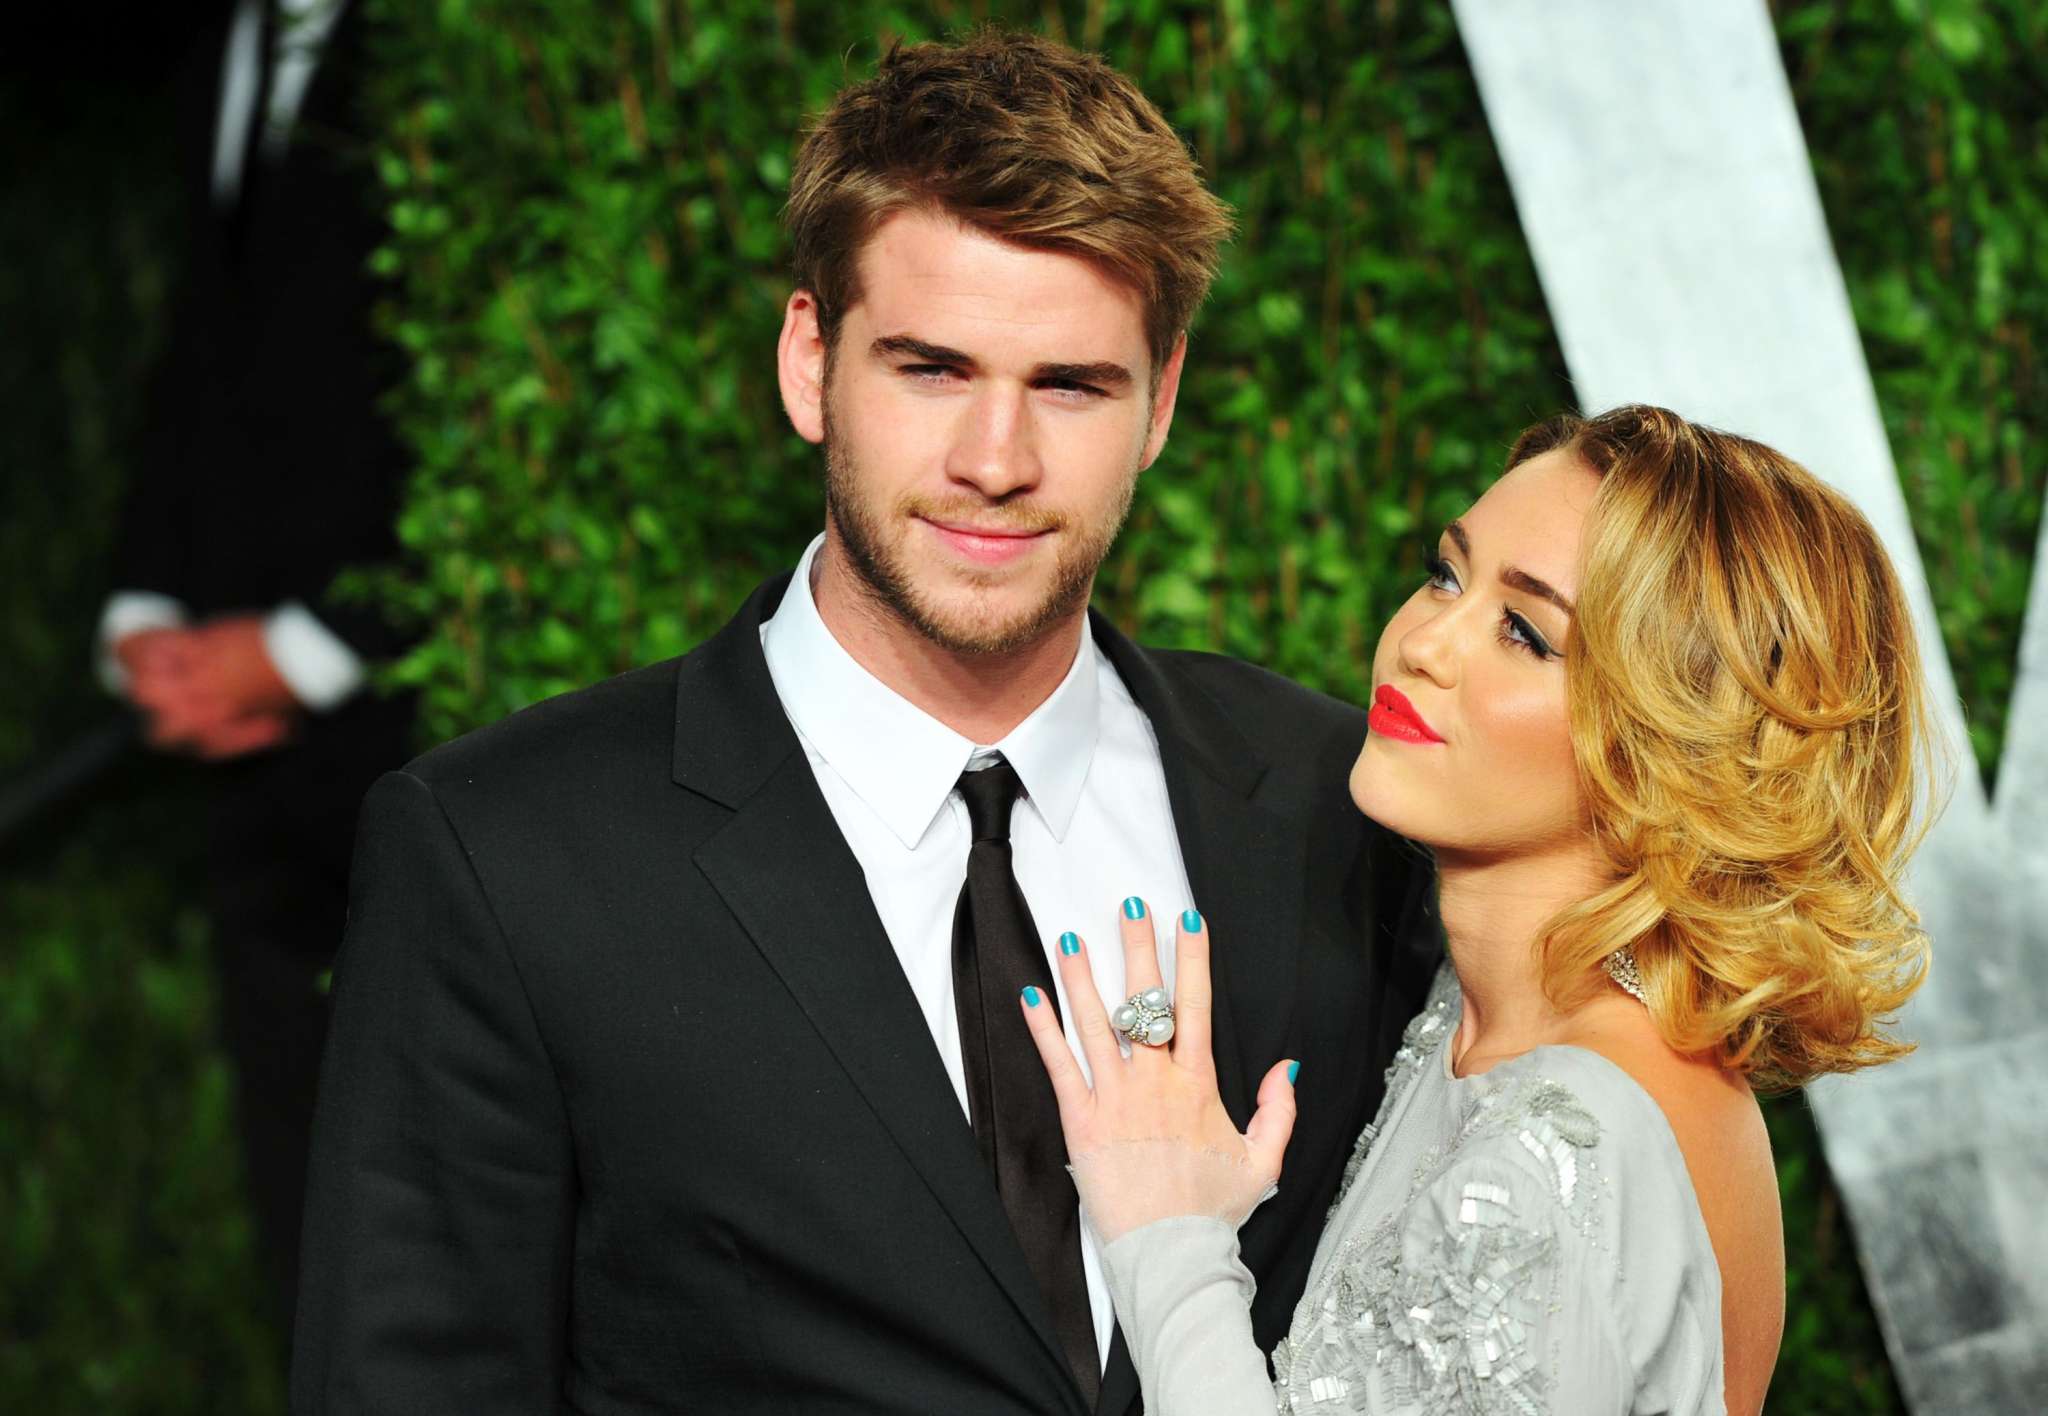 Miley Cyrus Confirms Marriage With Liam Hemsworth – Shares Stunning Wedding Pics ...